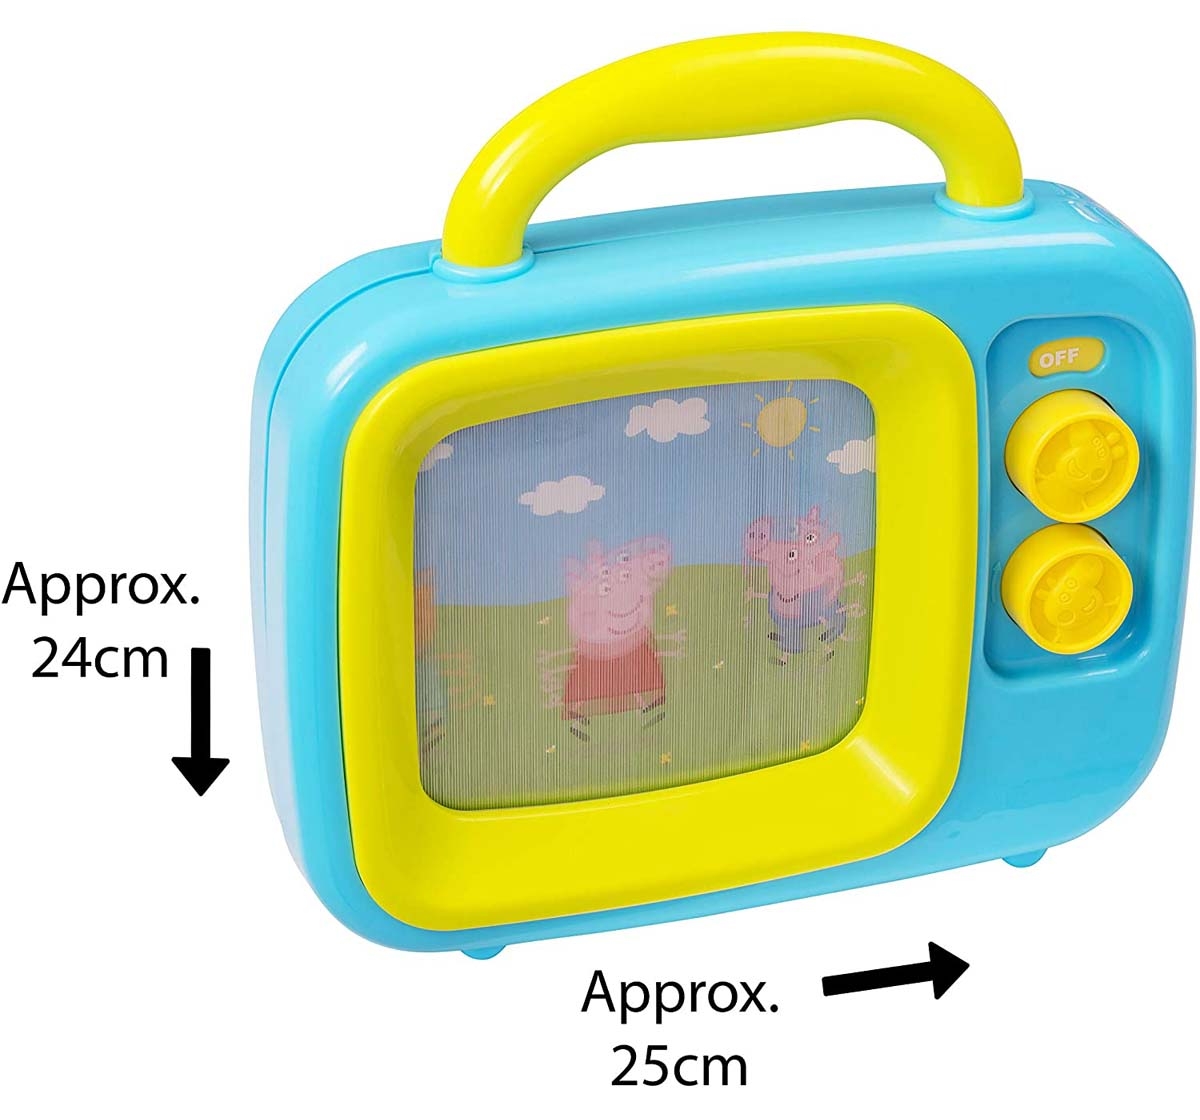 Peppa Pig | Peppa Pig My 1St Tv Roleplay sets for Kids age 18M + 2